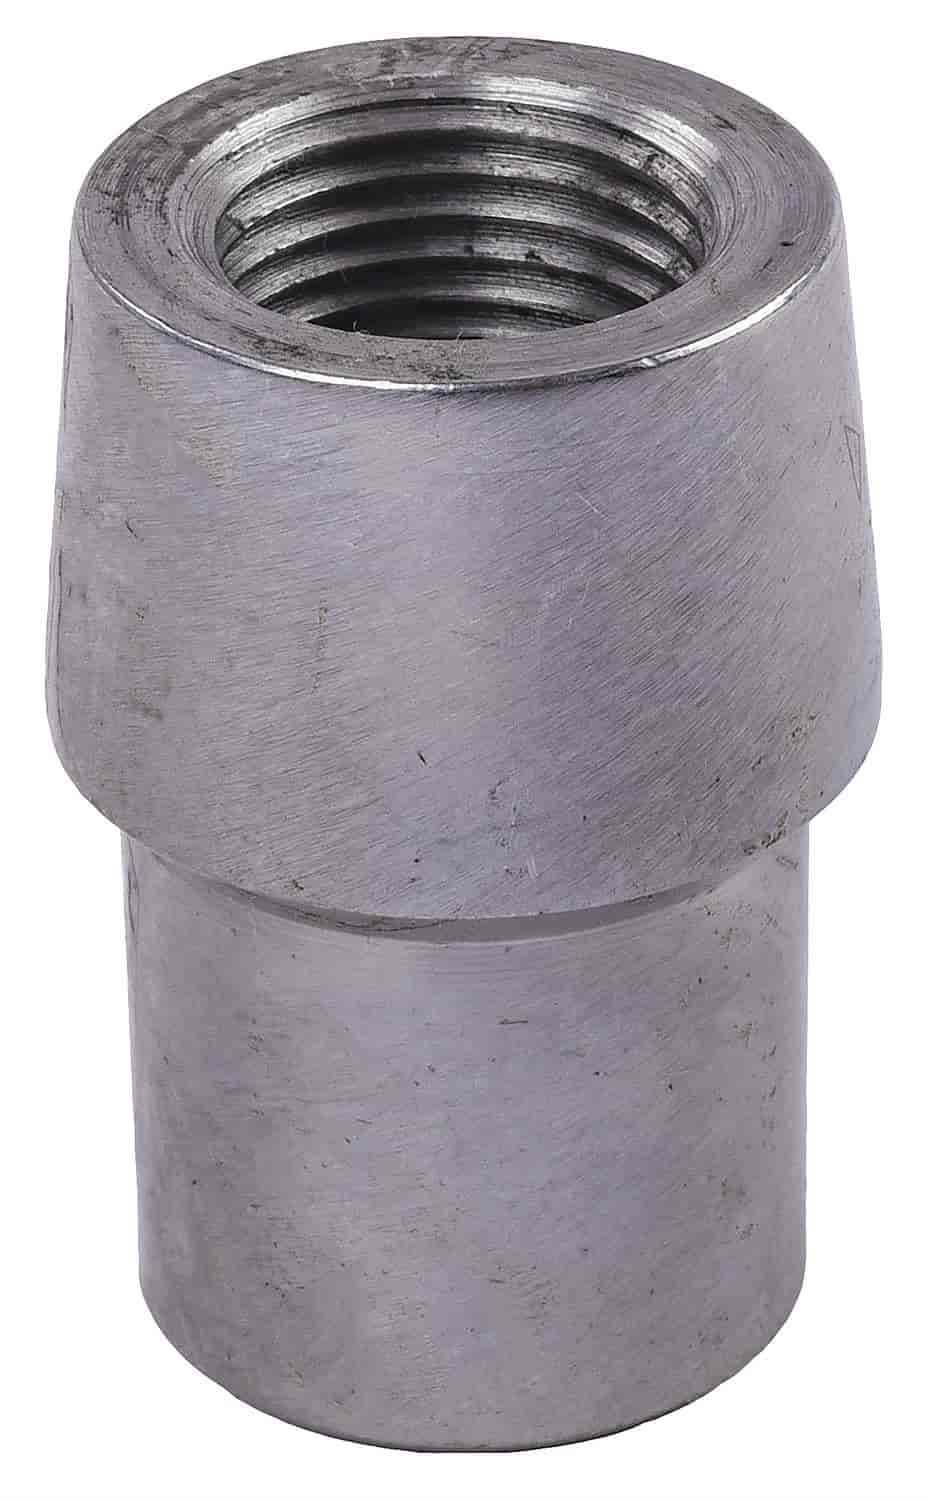 Right-Hand Threaded Tube End